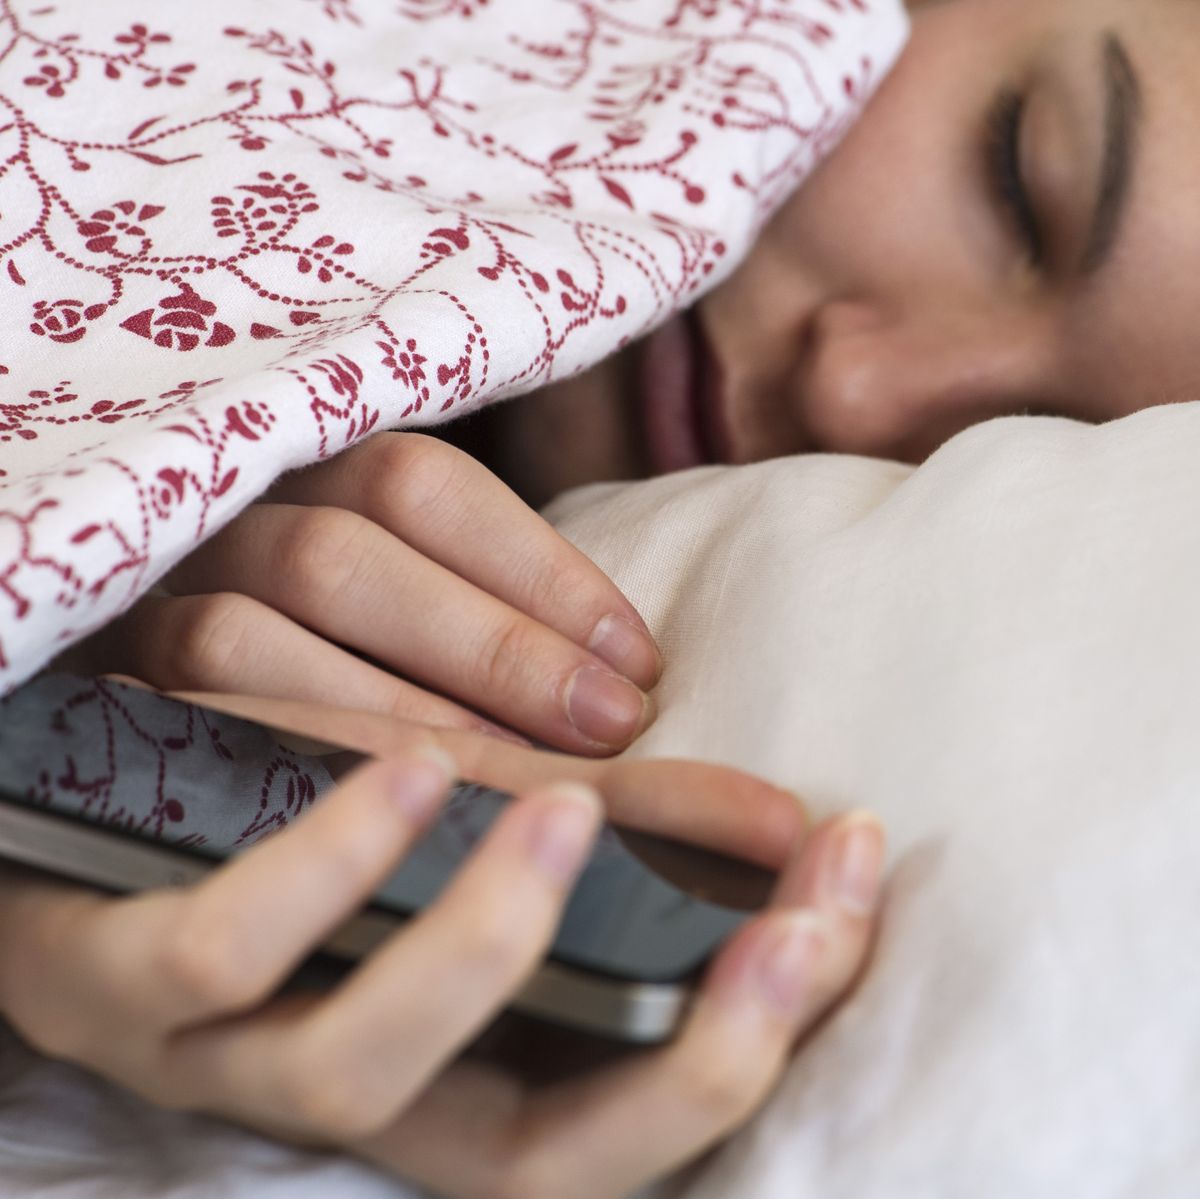 Woman sleeping in bed with smartphone in hand